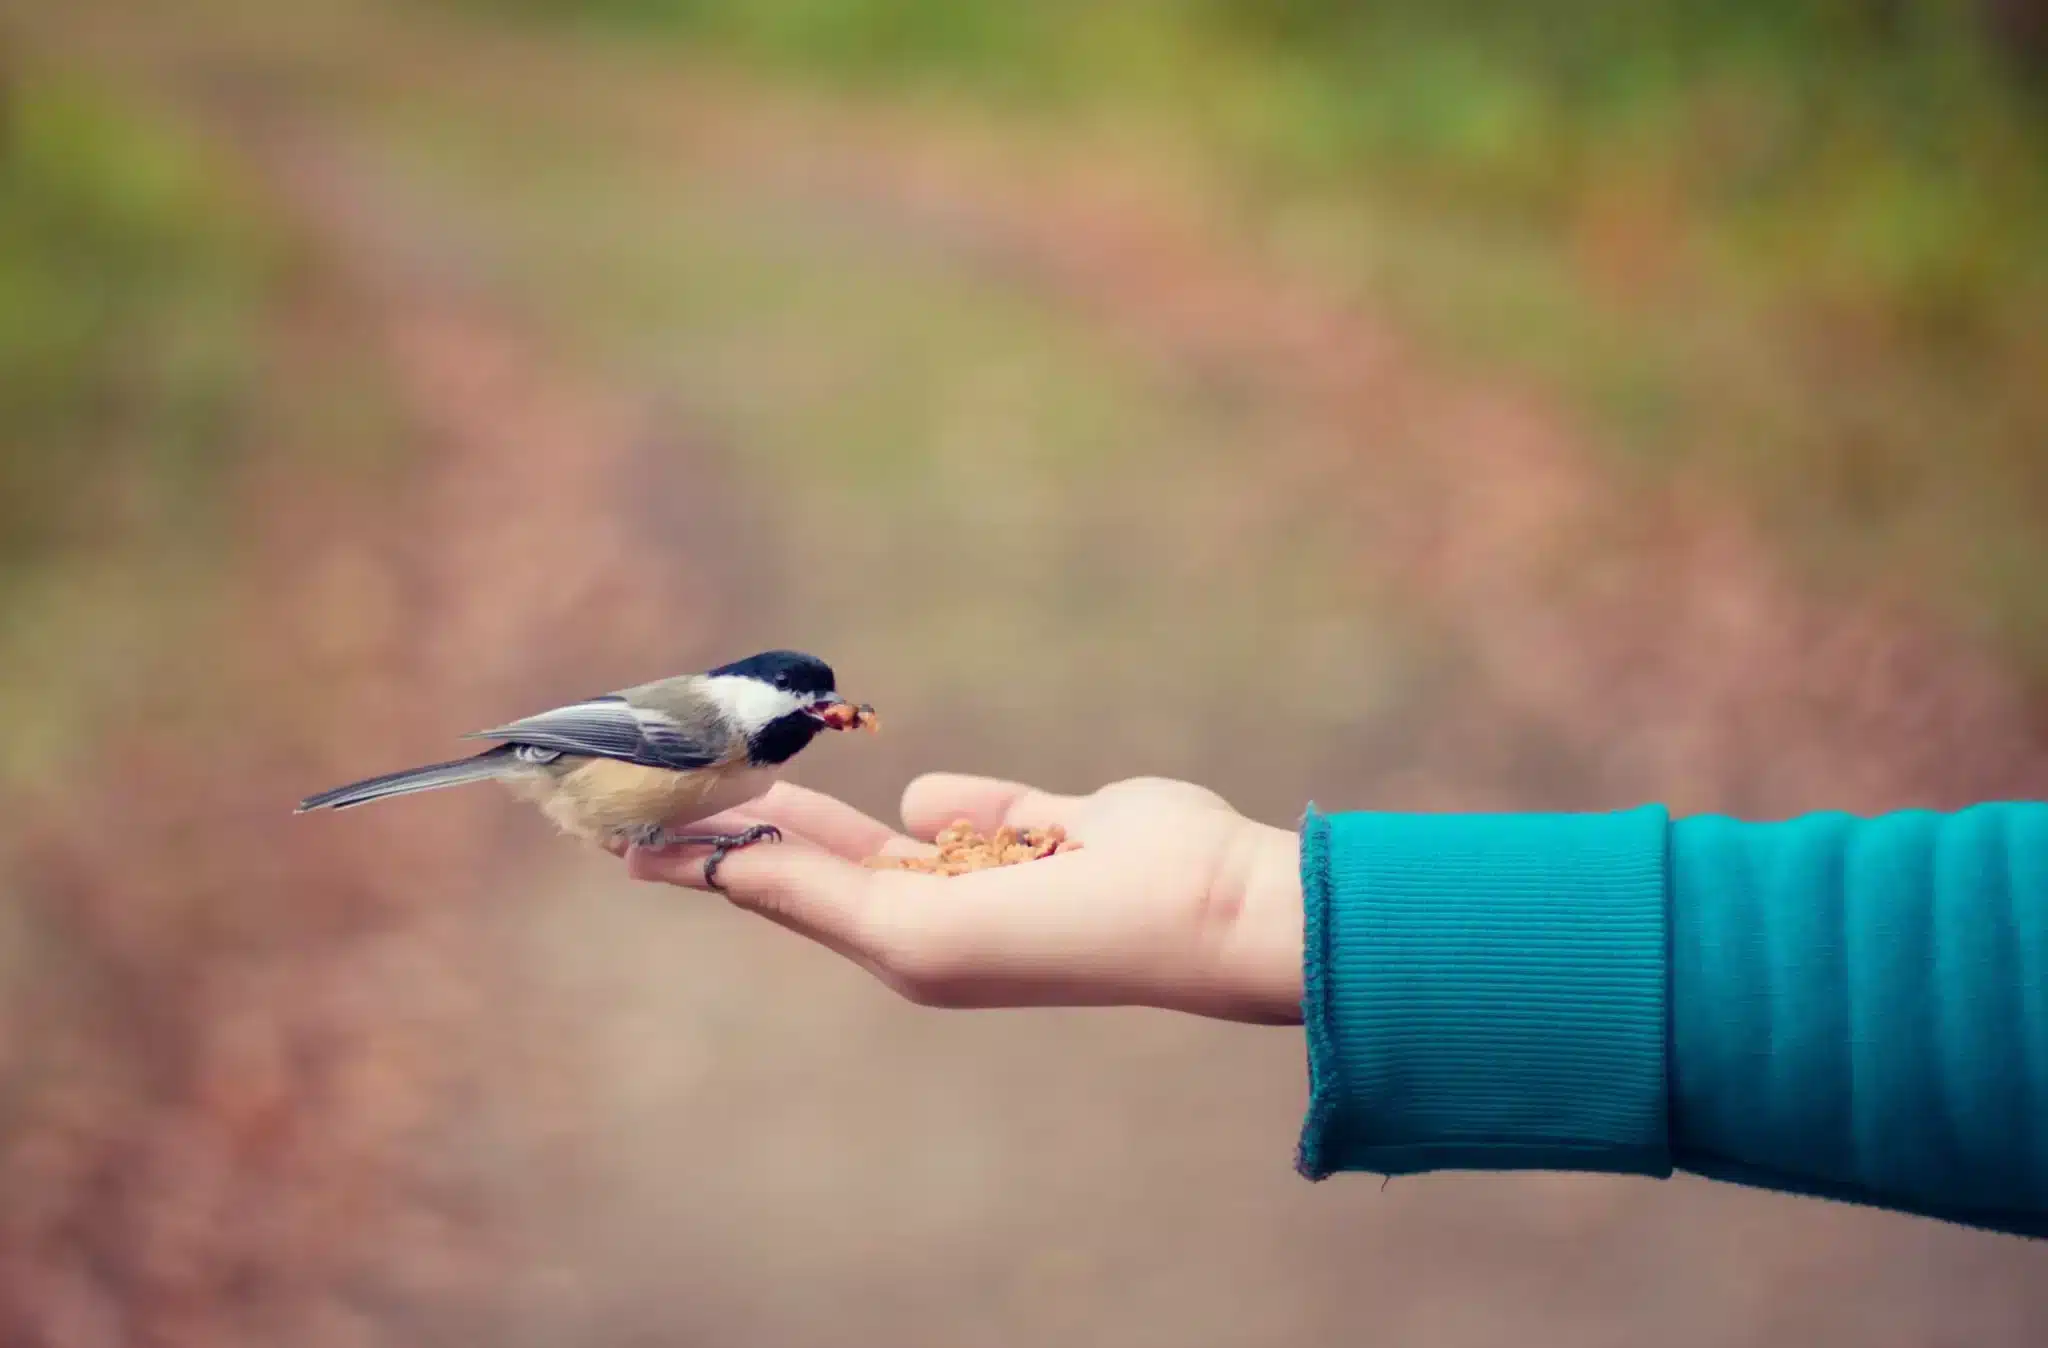 A gentle chickadee bird perches on a person's outstretched hand, which is offering small grains or bird feed. The person is wearing a teal sleeve, and the background is softly blurred with natural tones of a forest or park pathway.